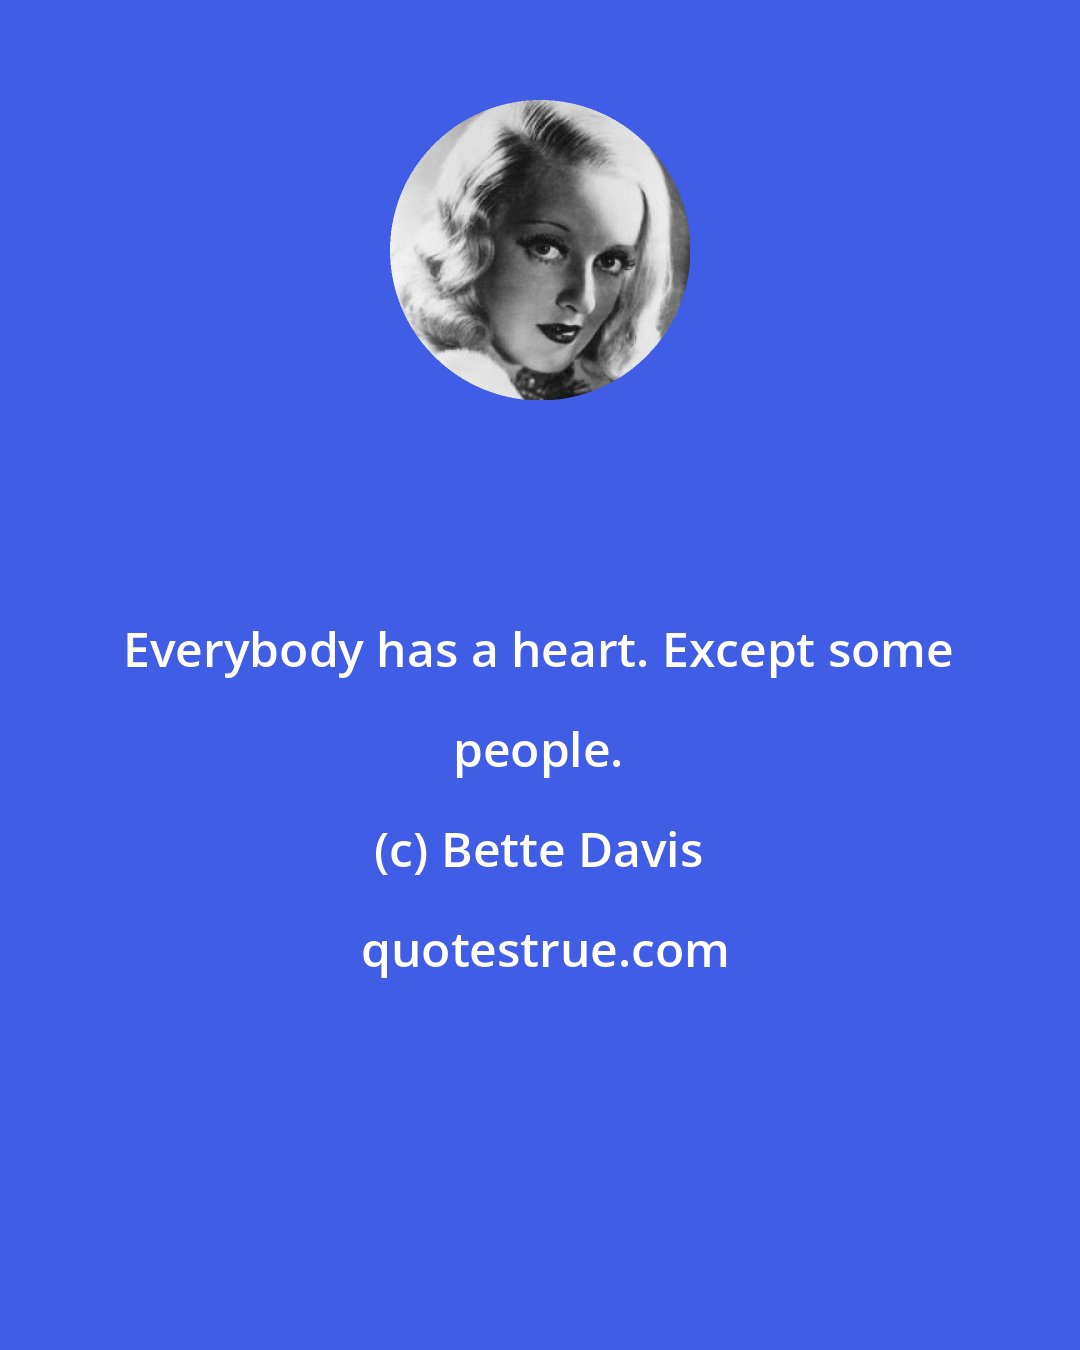 Bette Davis: Everybody has a heart. Except some people.